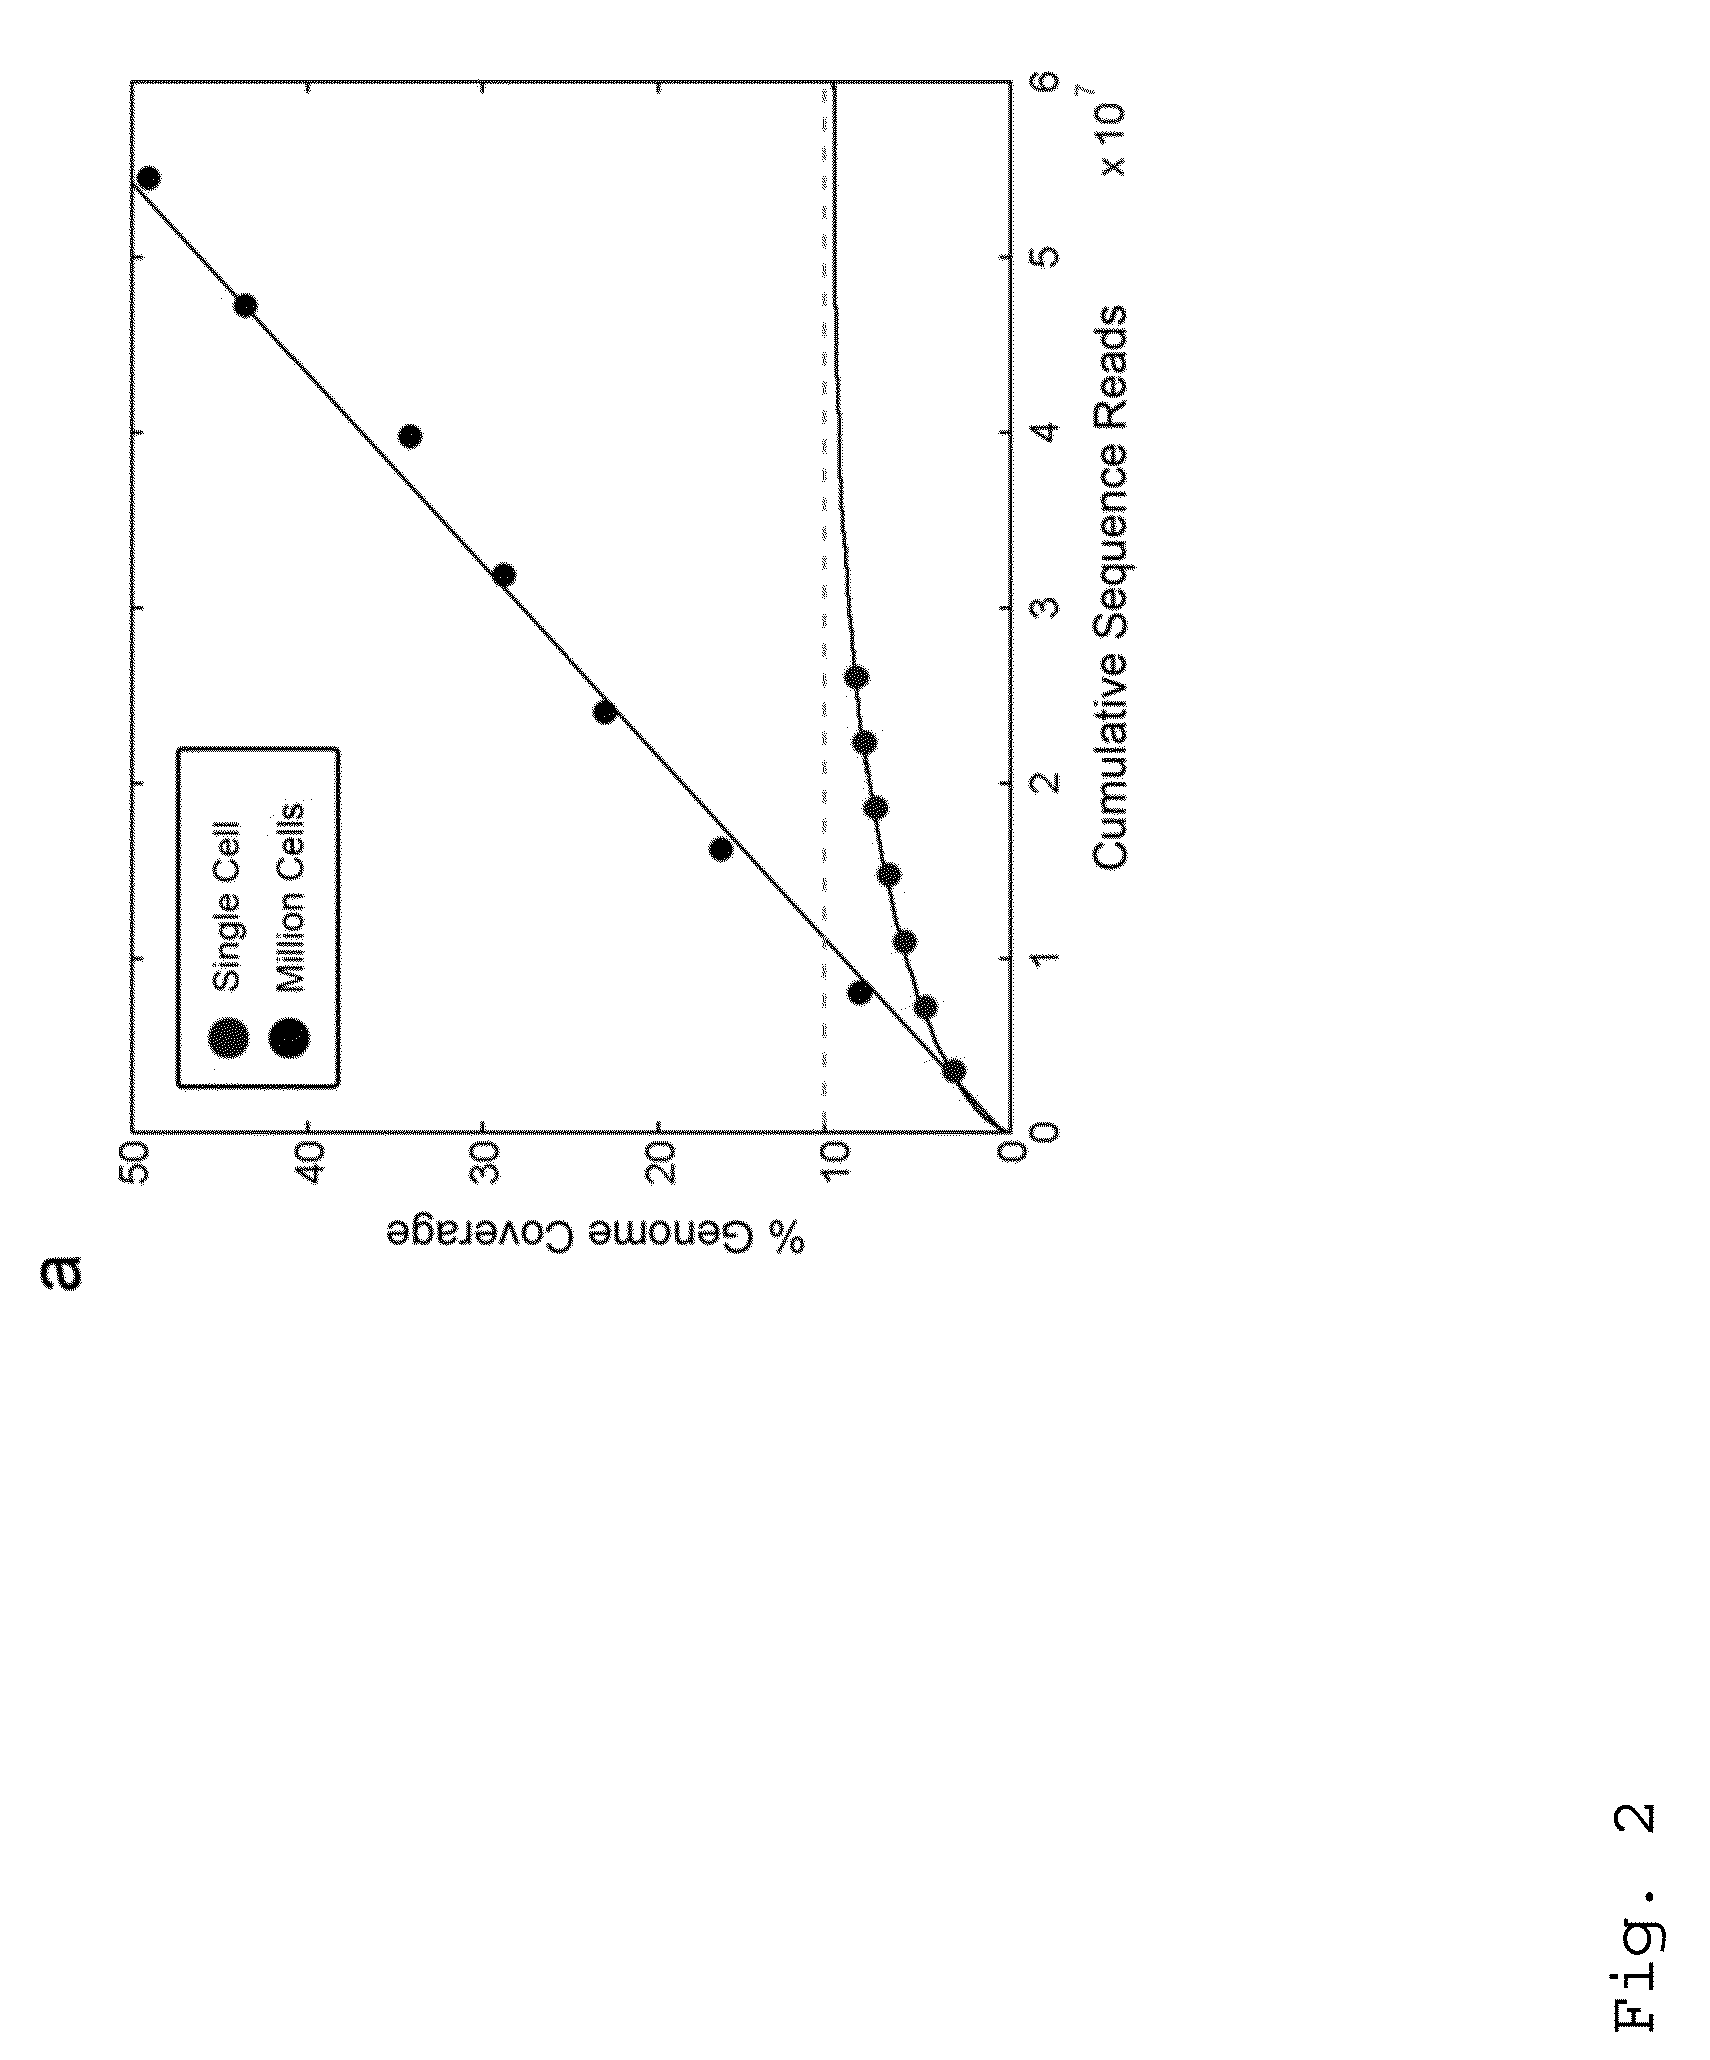 Varietal counting of nucleic acids for obtaining genomic copy number information